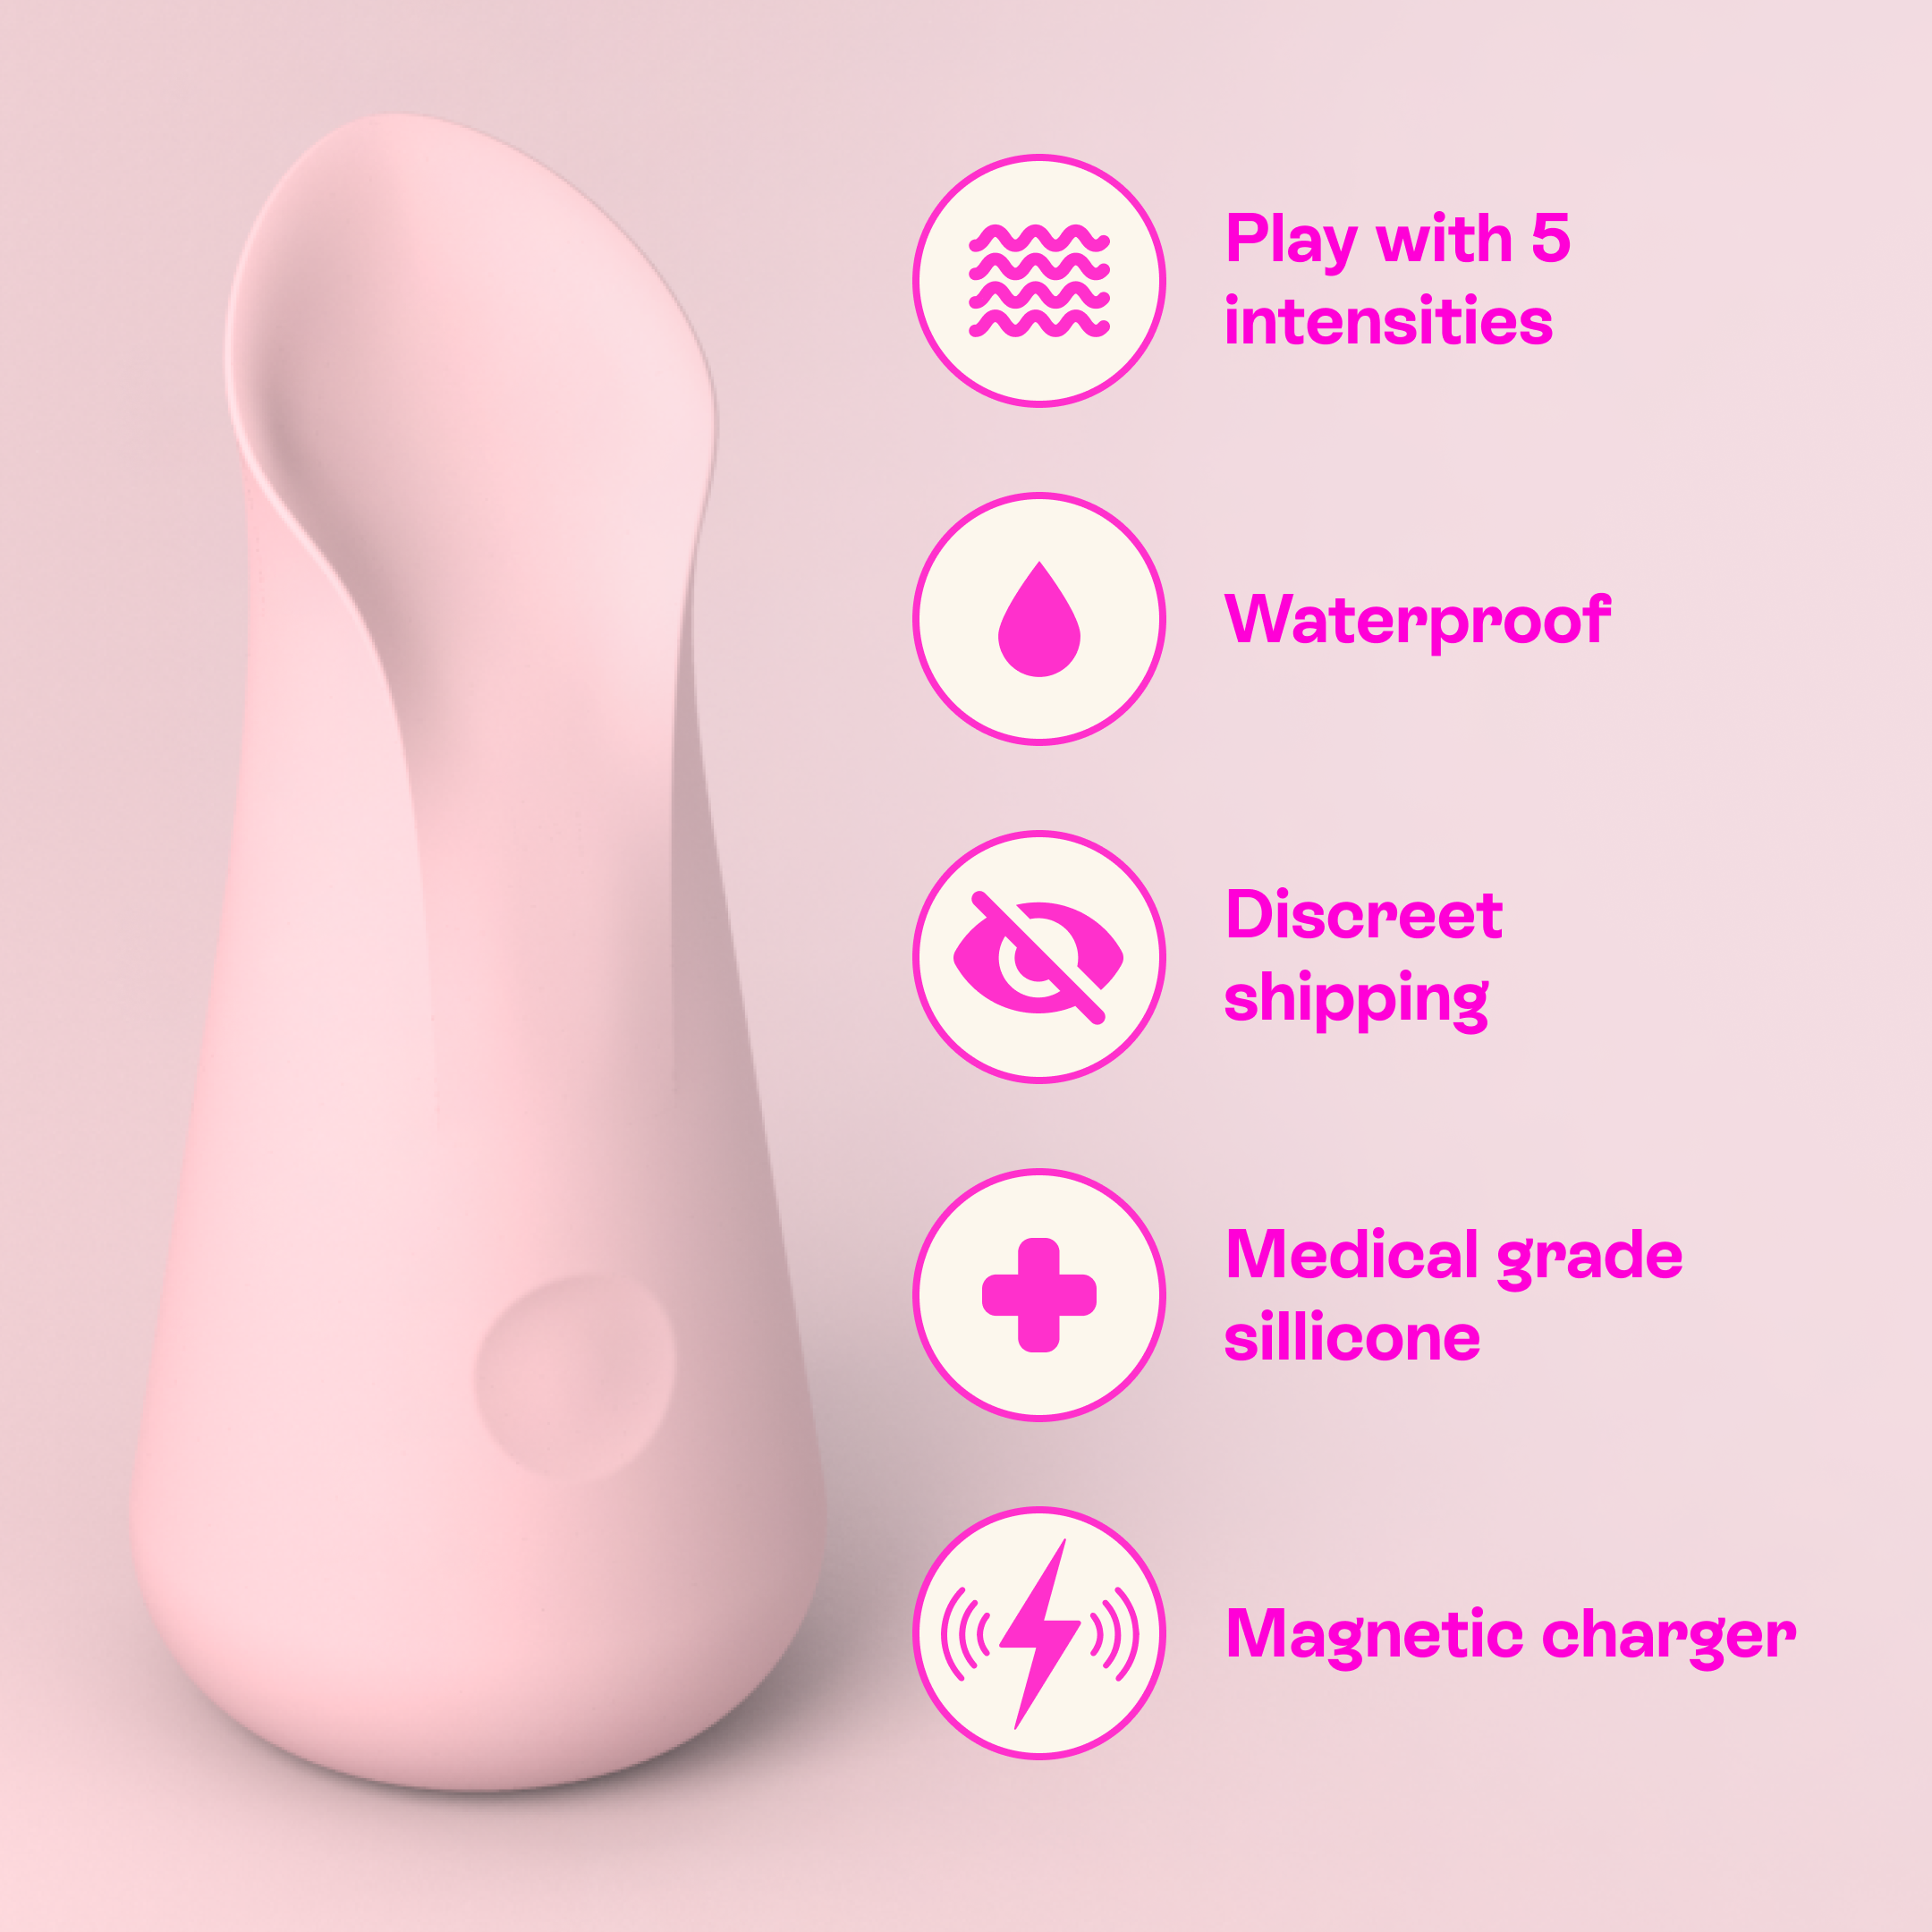 Uno, Features & benefits, Sex Toy & Vibrator for women